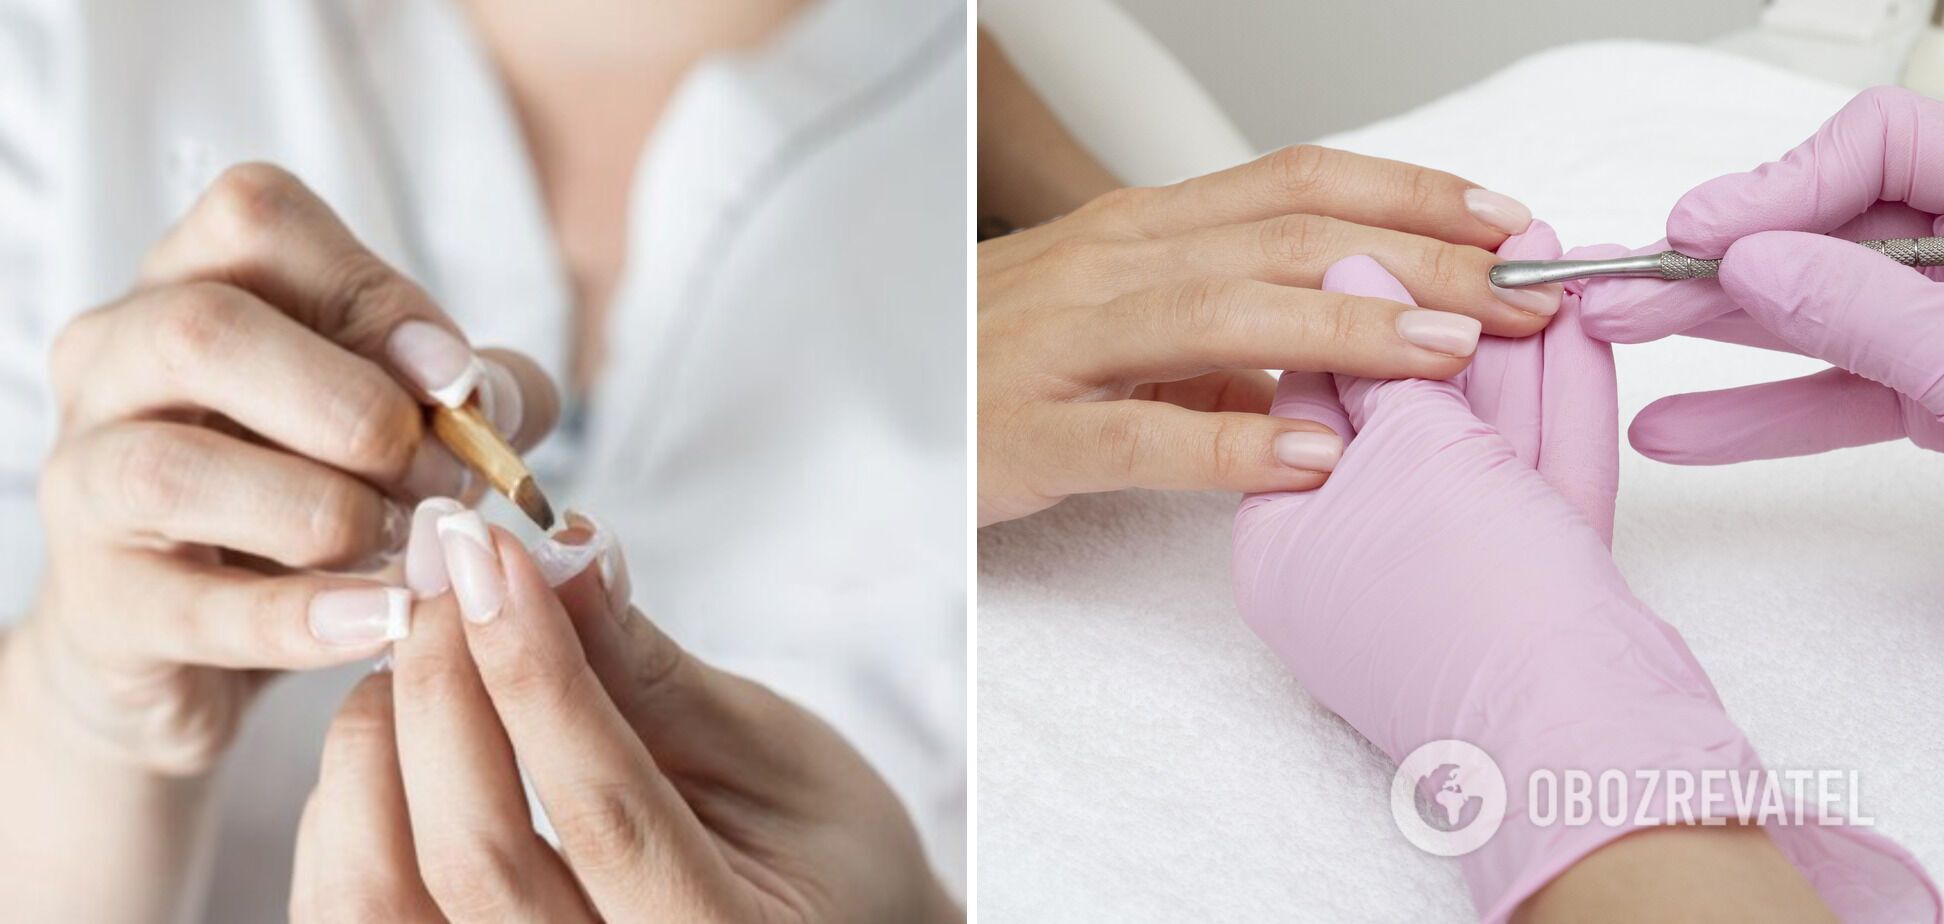 Manicure lasts longer and is not so harmful: what are polygel nails and why you should not do them at home